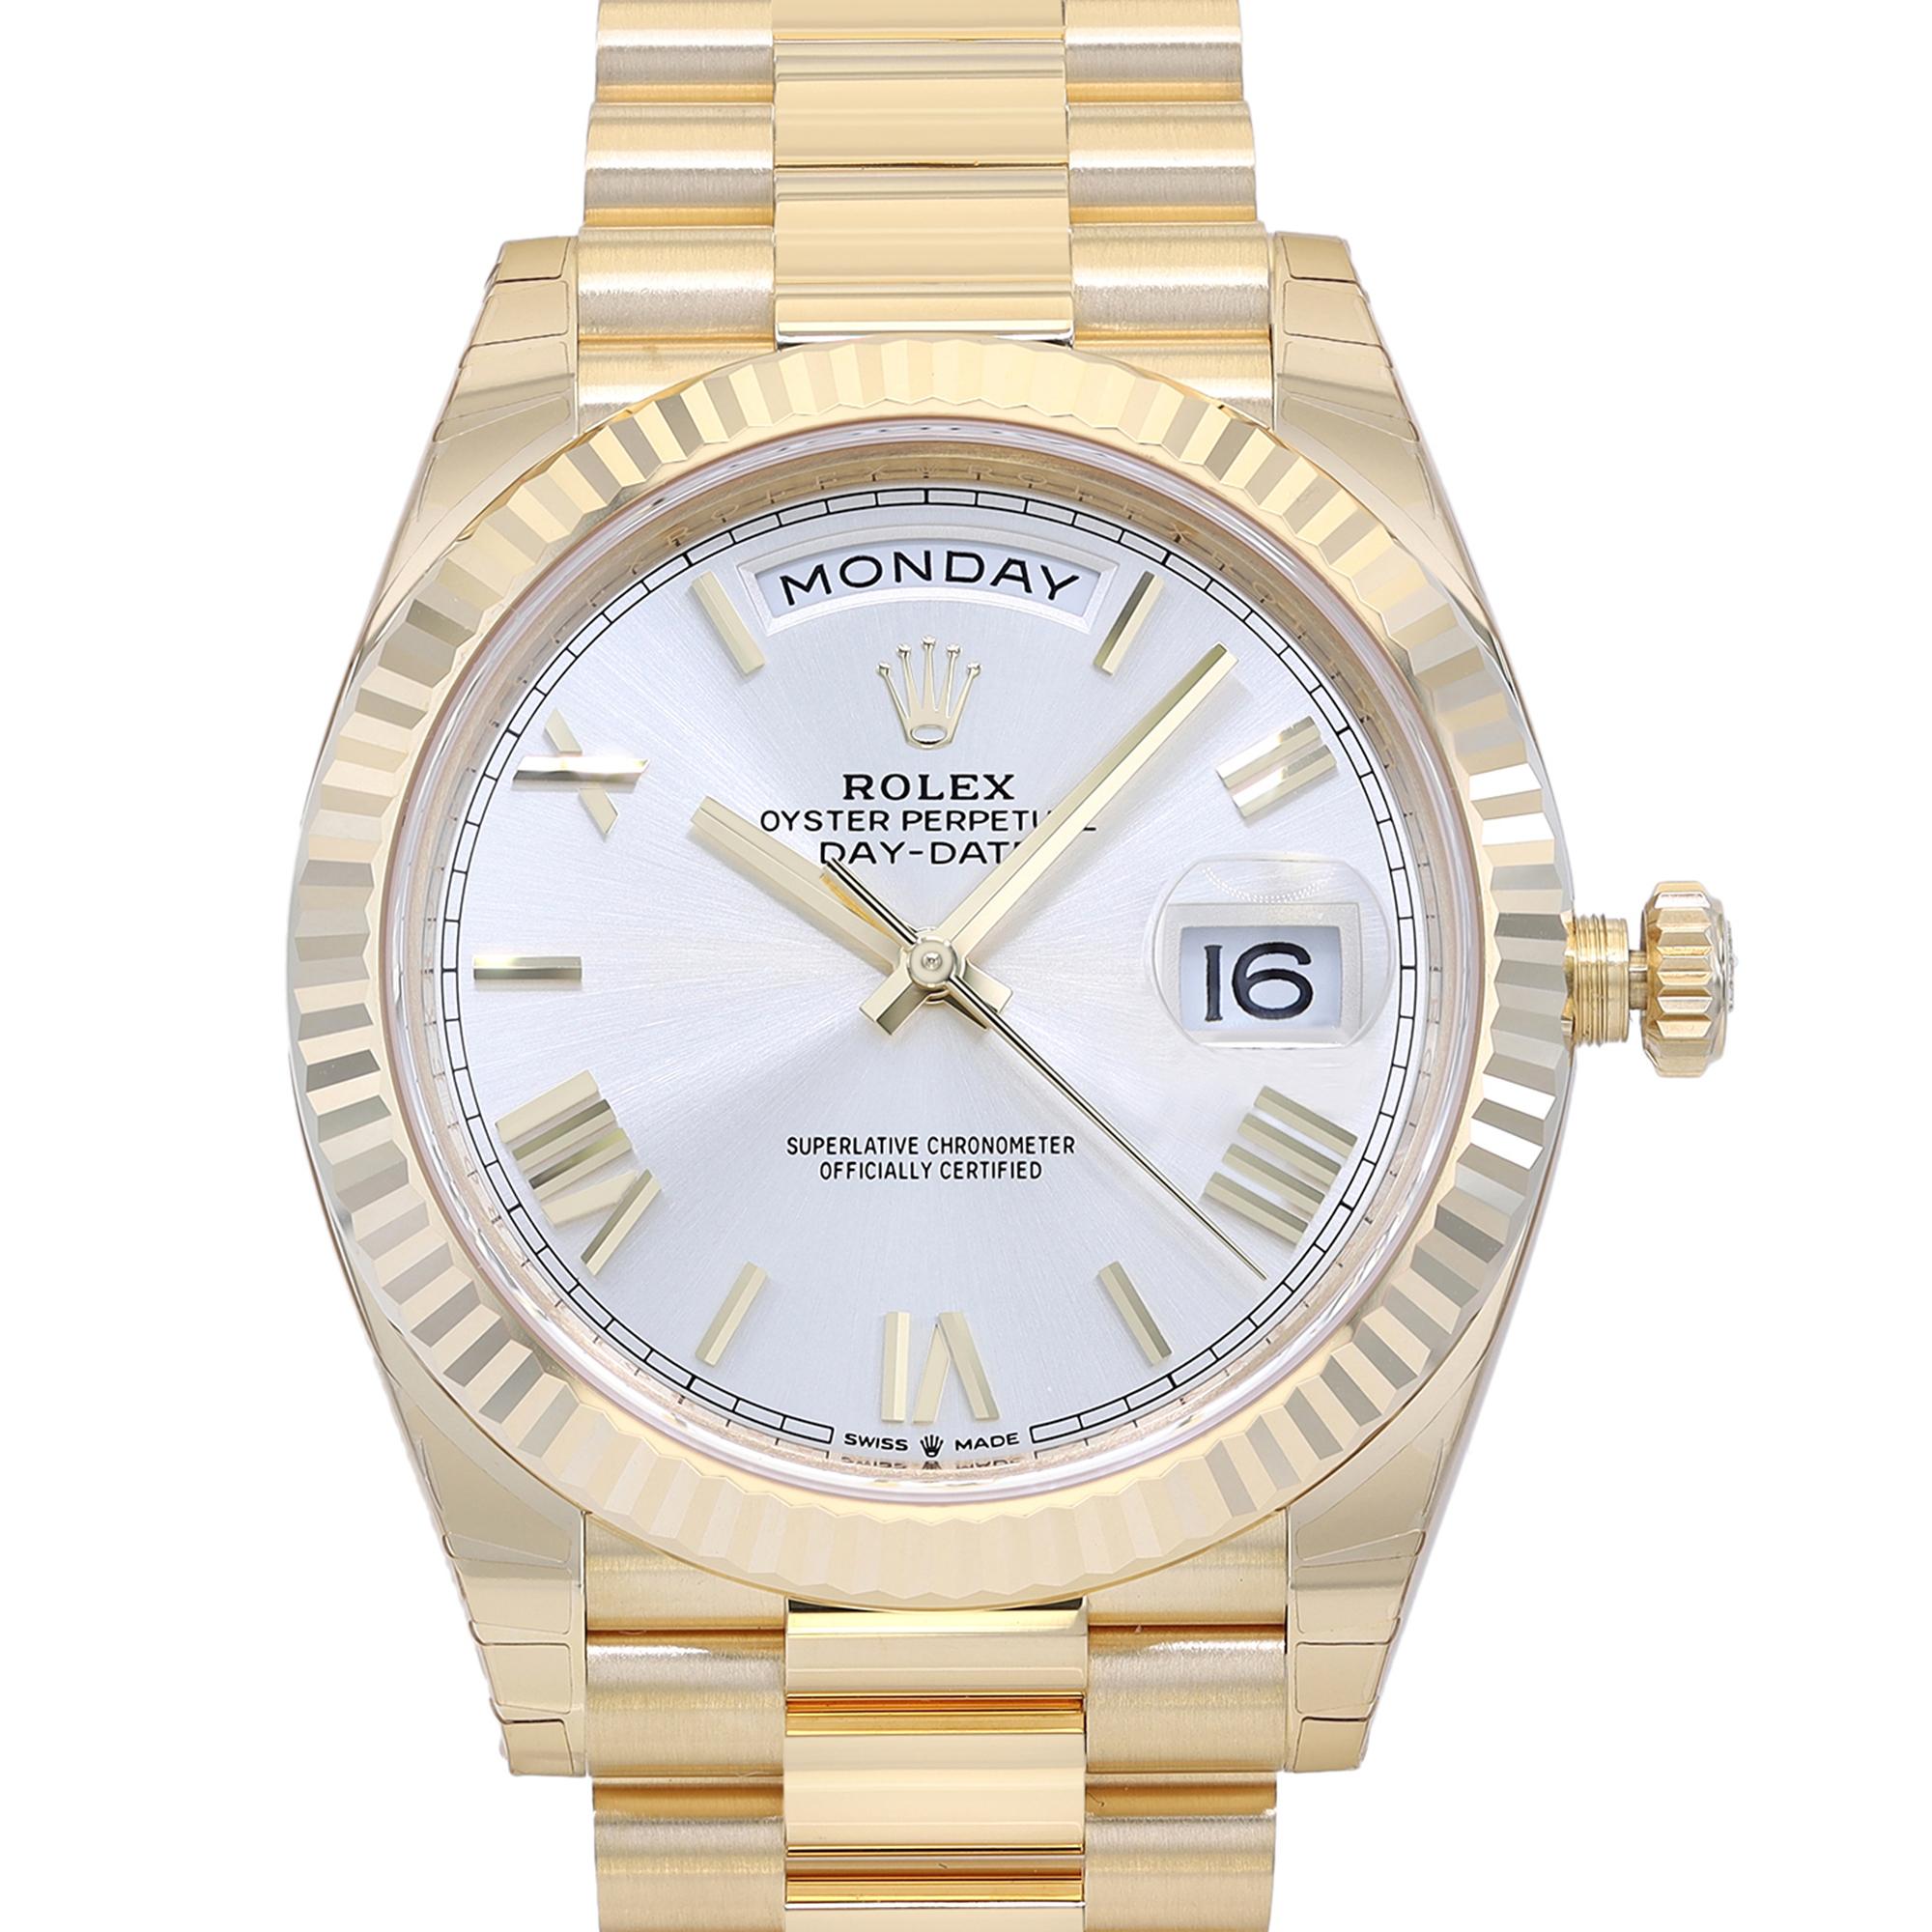 Unworn Rolex Day Date 40mm 18K Gold Roman Silver Dial President Watch 228238. 2022 Card. This Beautiful Timepiece Features: 18k Yellow Gold with 18k Yellow Gold Rolex President bracelet. Fixed fluted 18kt yellow gold bezel. Silver dial with